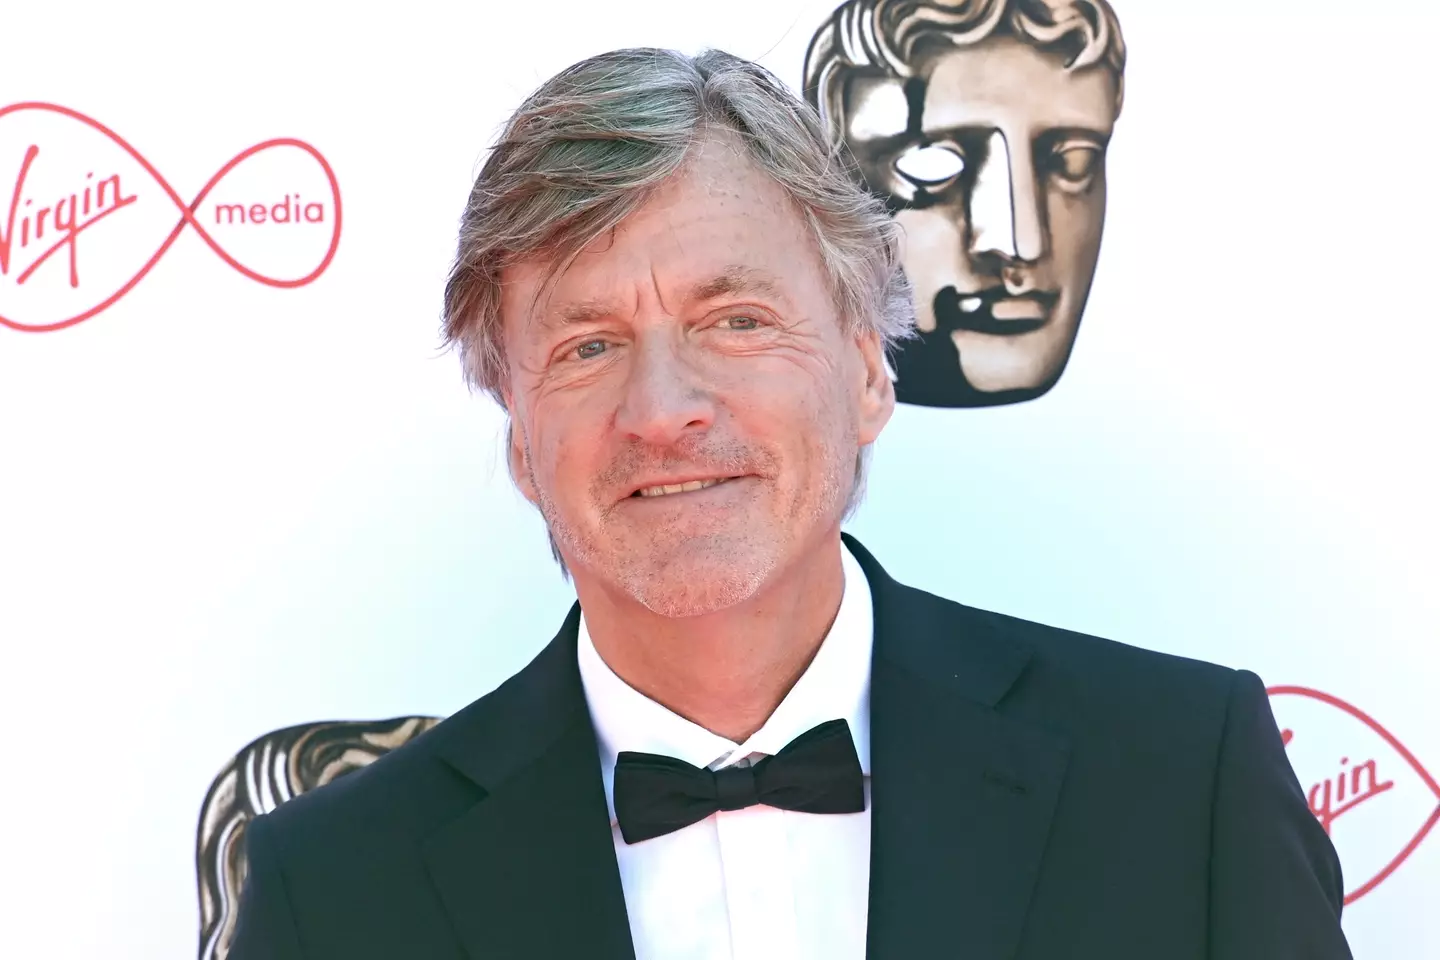 Richard Madeley revealed his 'real' voice on Good Morning Britain.